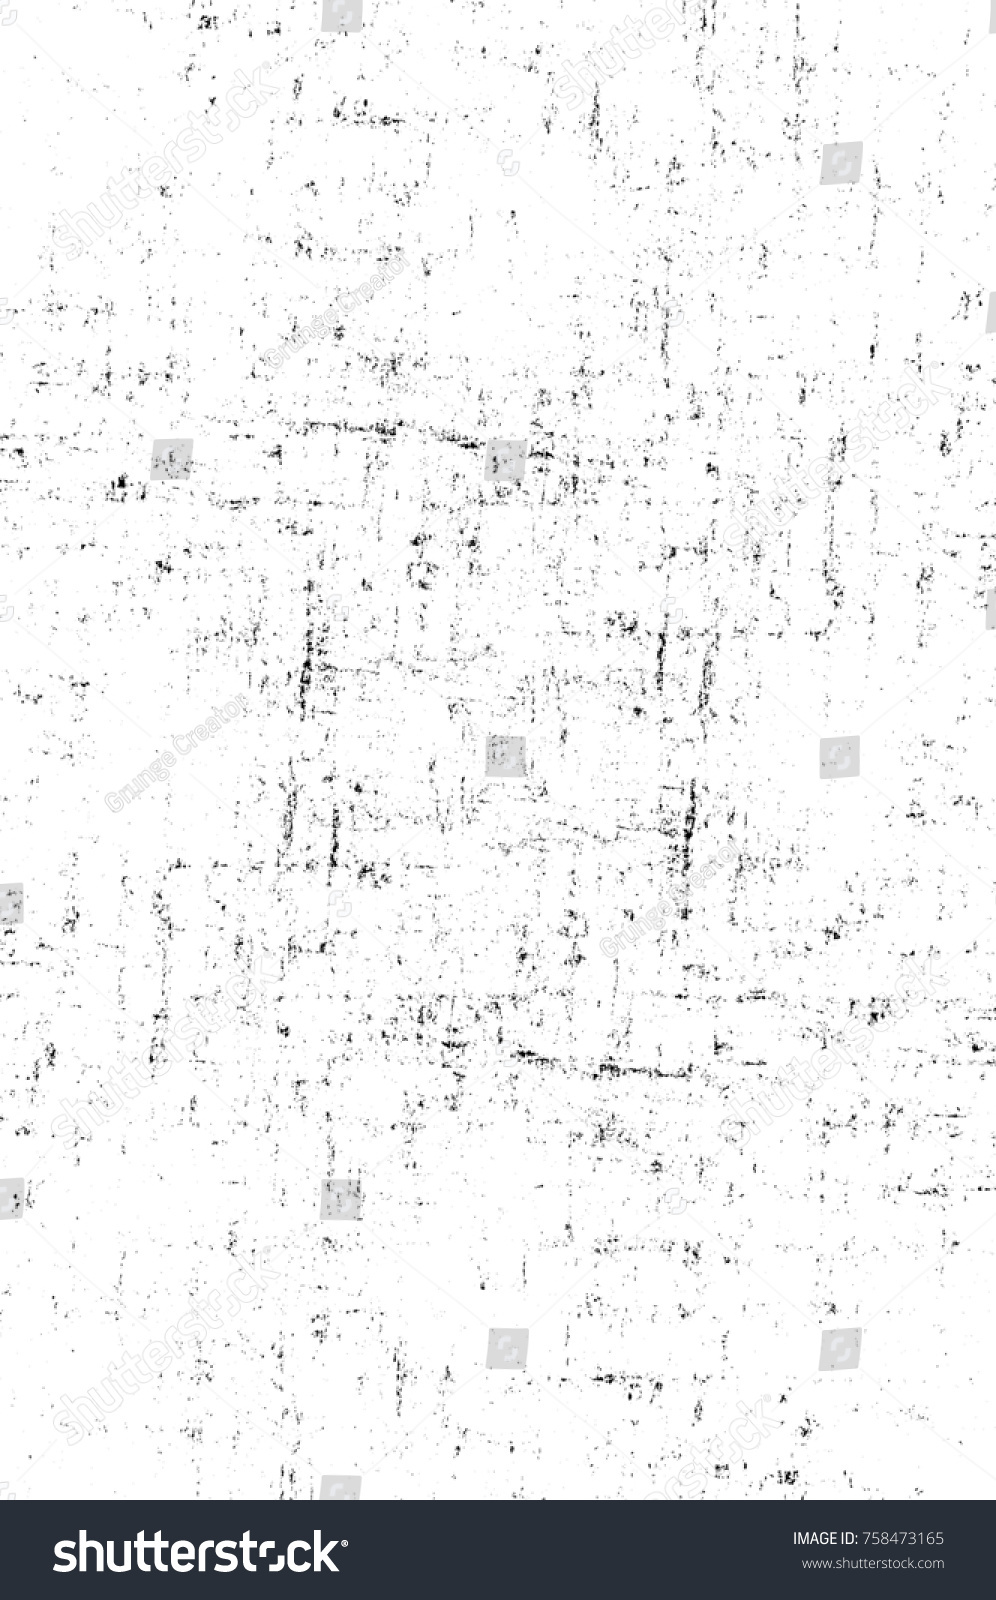 Grunge black and white seamless pattern. Monochrome abstract texture. Background of cracks, scuffs, chips, stains, ink spots, lines. Dark design background surface. Gray printing element #758473165